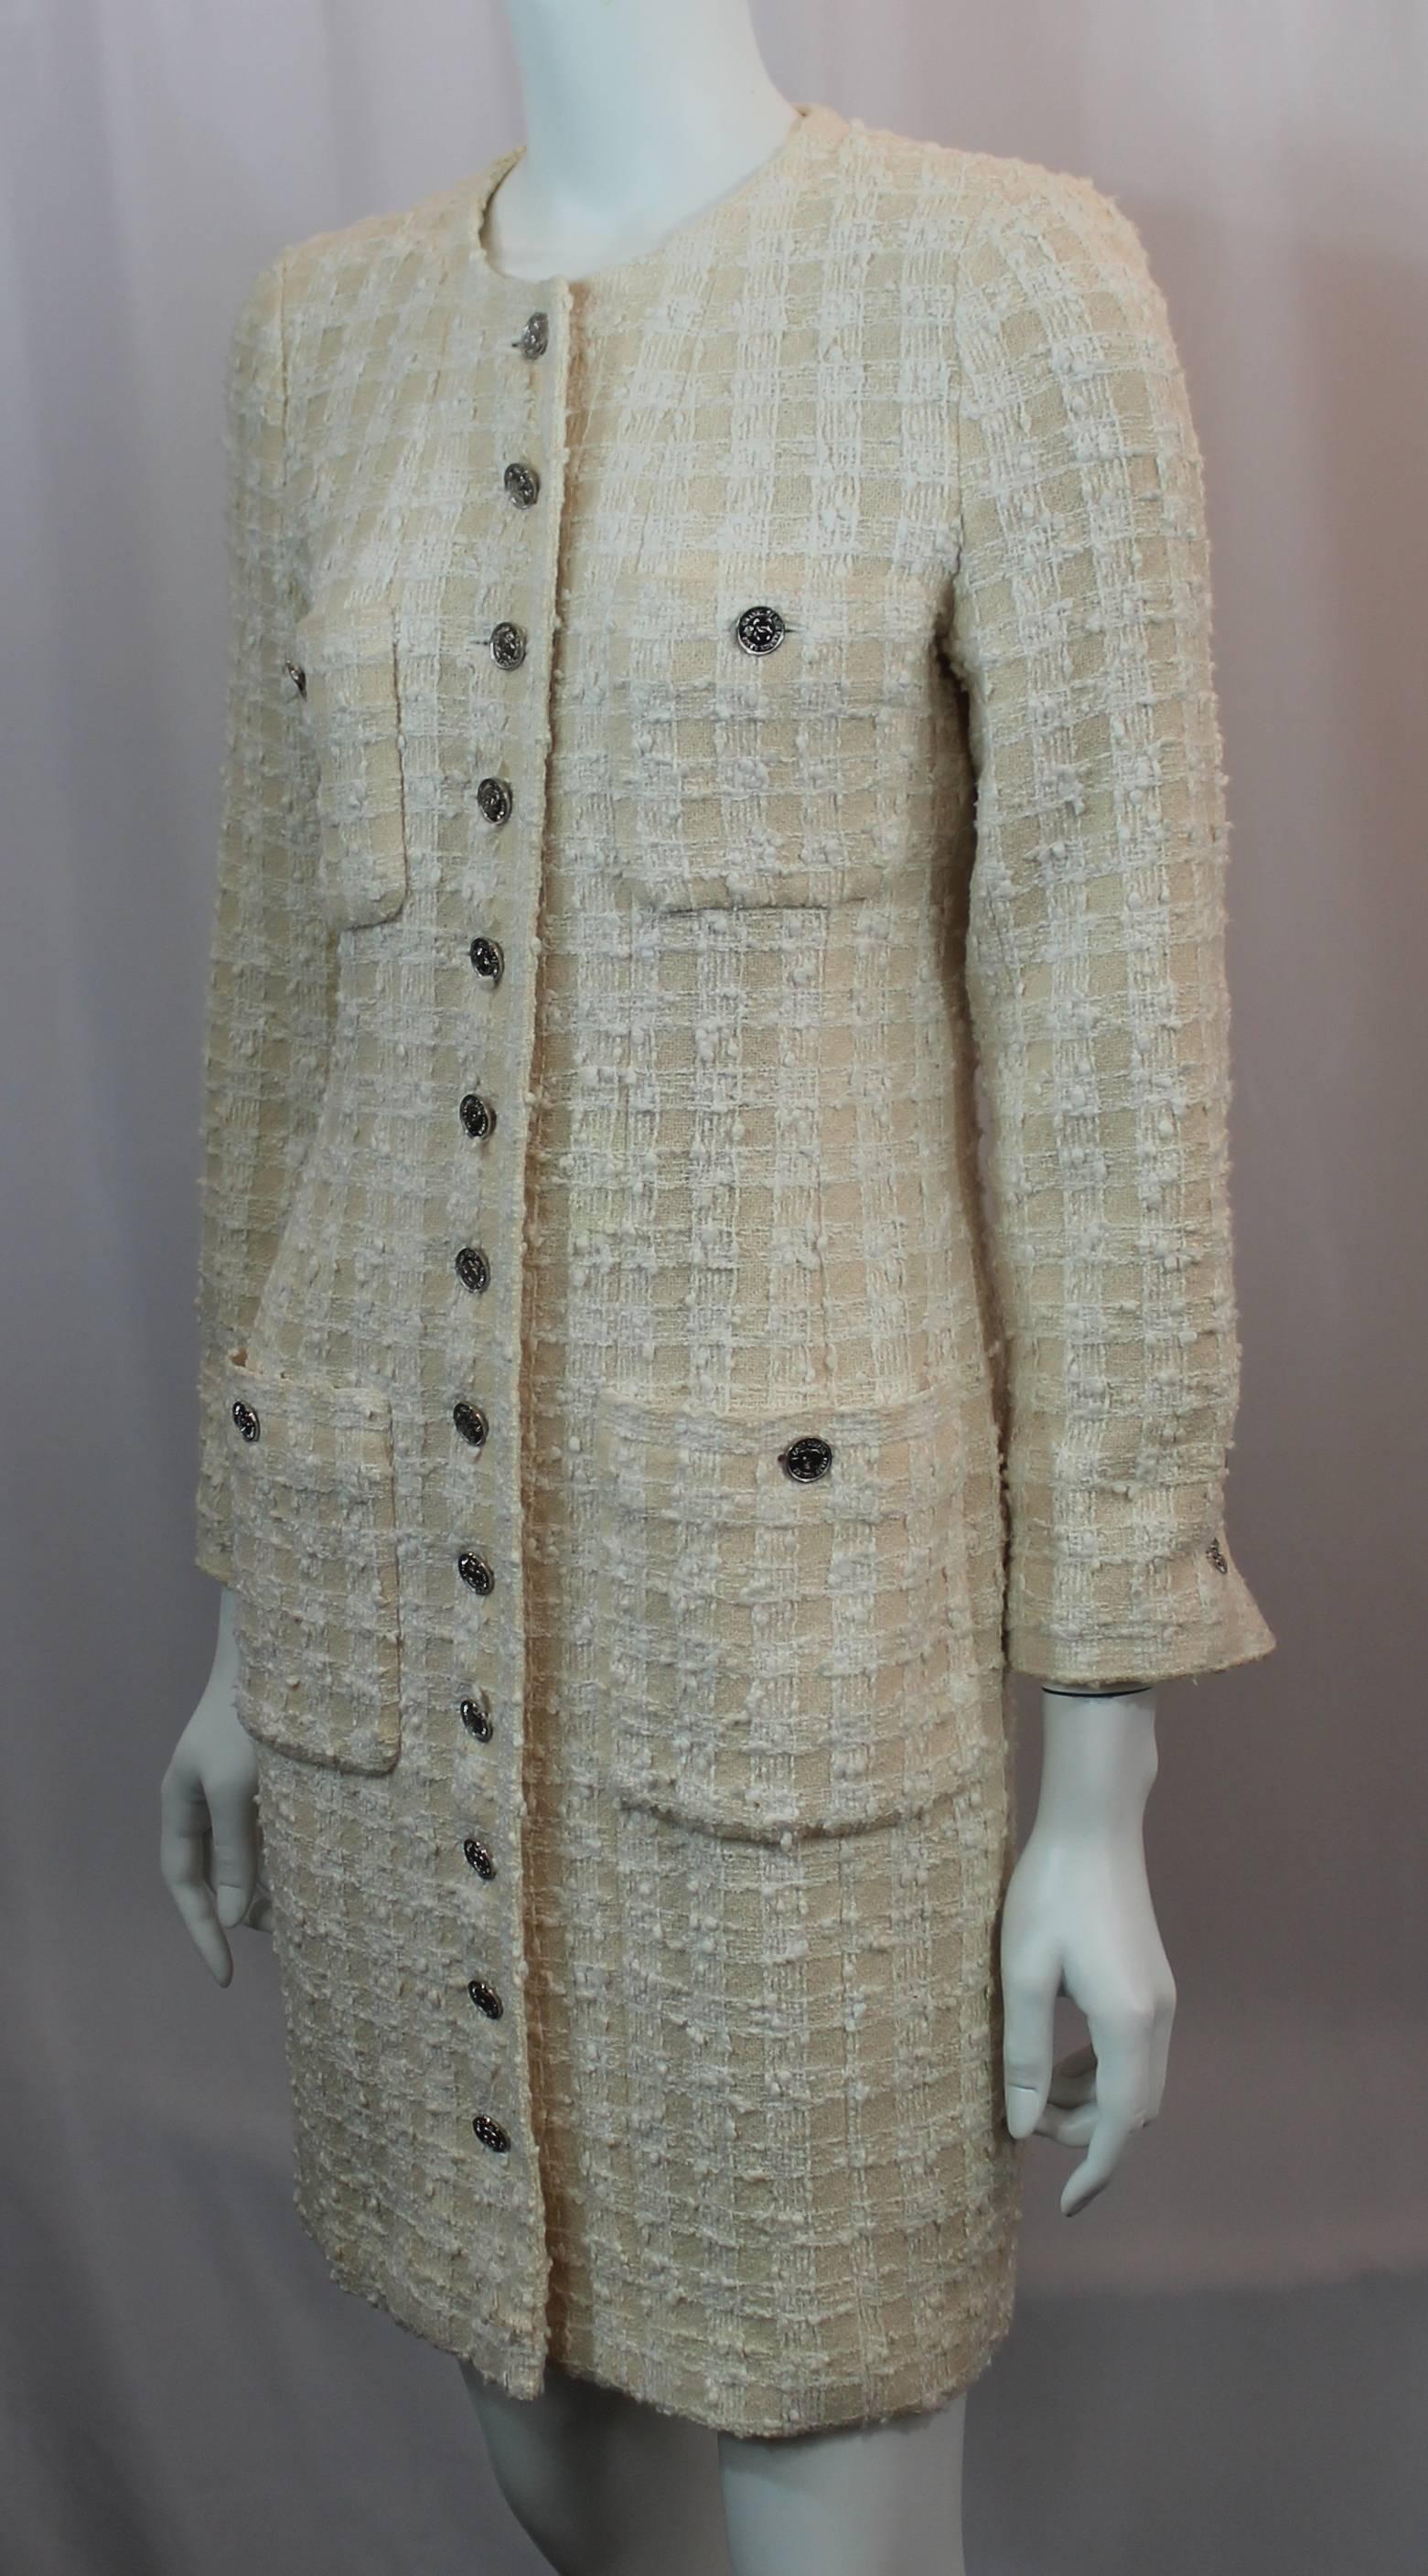 Chanel Vintage Cream Cotton/Wool Blend Roundneck 3/4 Coat with 4 Pockets - S - 80s. This gorgeous and elegant 3/4 coat is boucle tweed with silver 